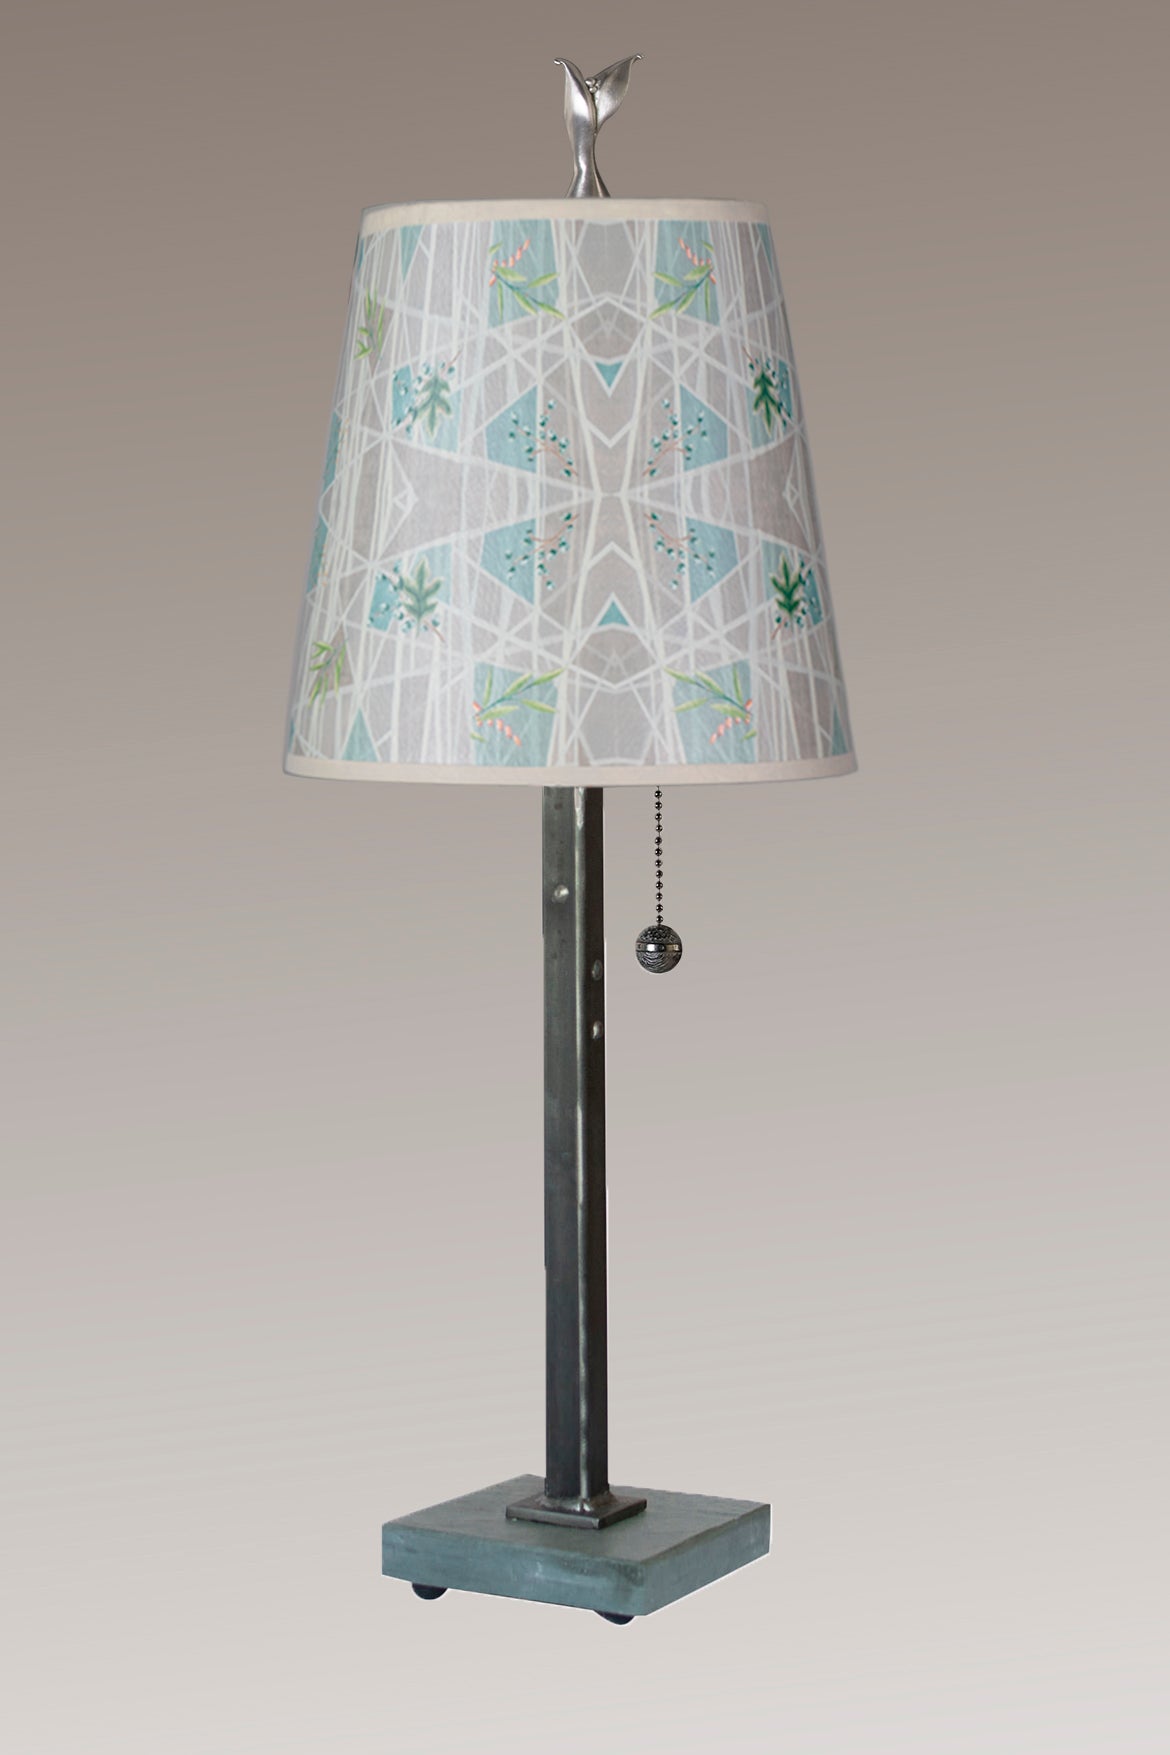 Janna Ugone & Co Table Lamps Steel Table Lamp with Small Drum Shade in Prism